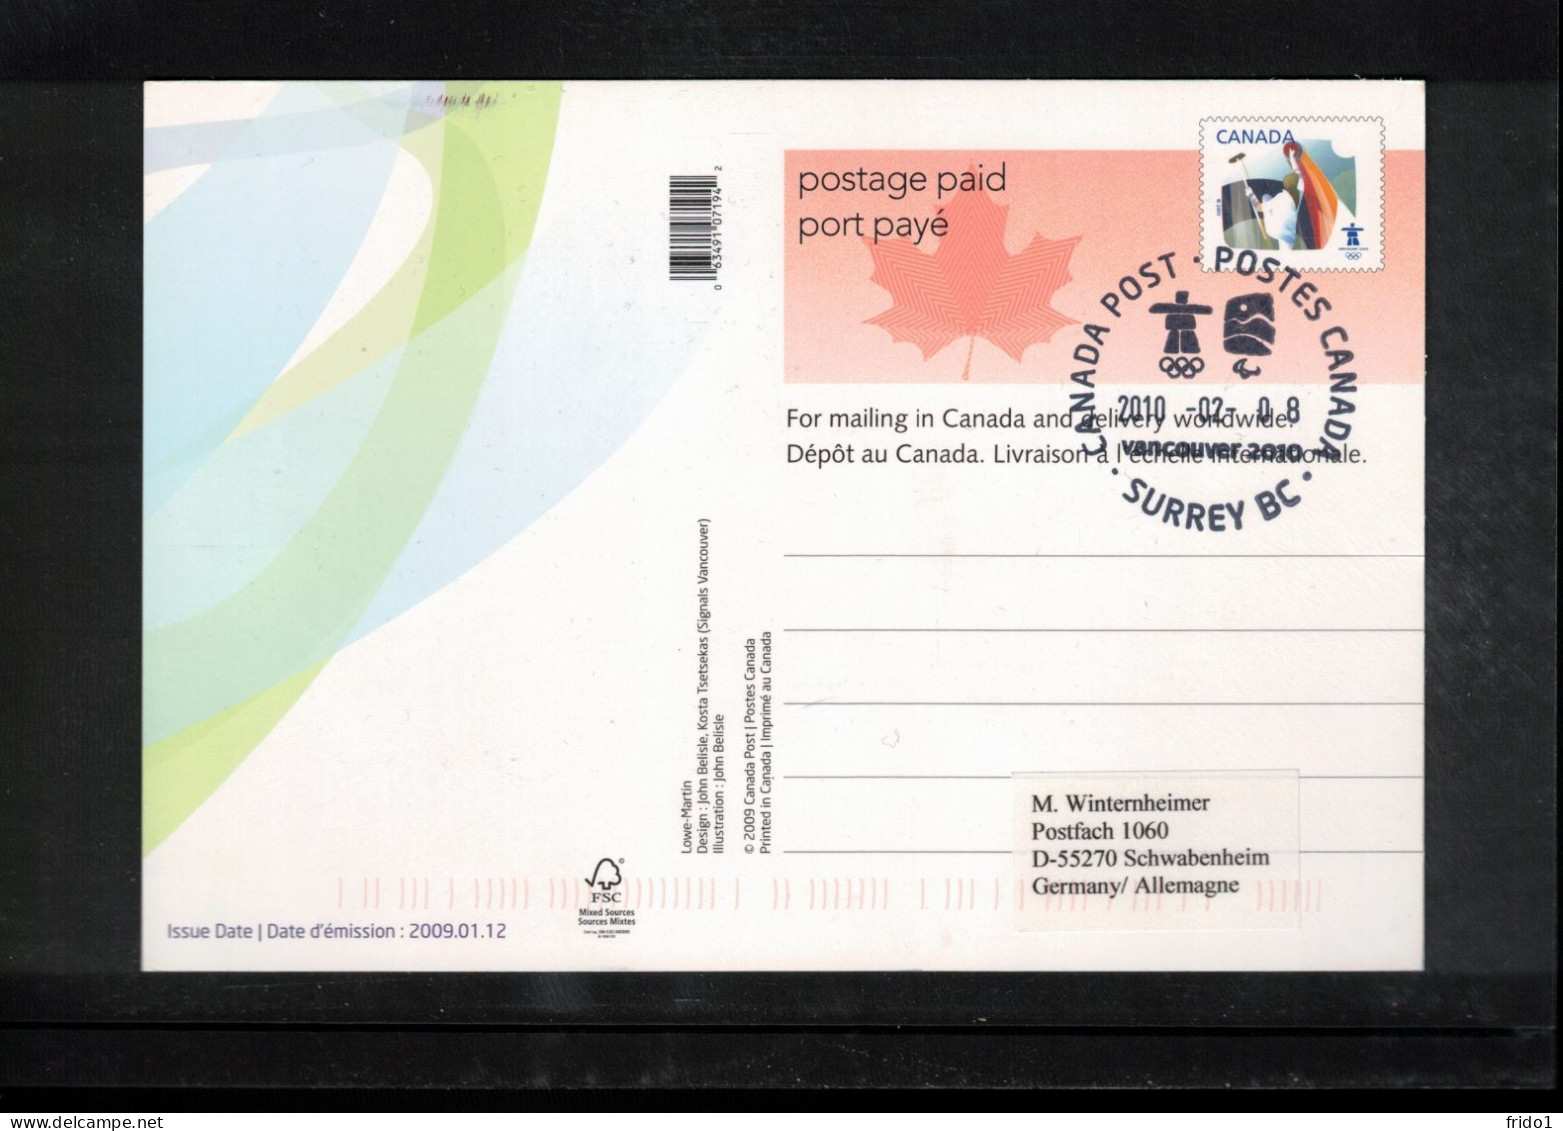 Canada 2010 Olympic Games Vancouver - SURREY BC Postmark Interesting Postcard - Hiver 2010: Vancouver